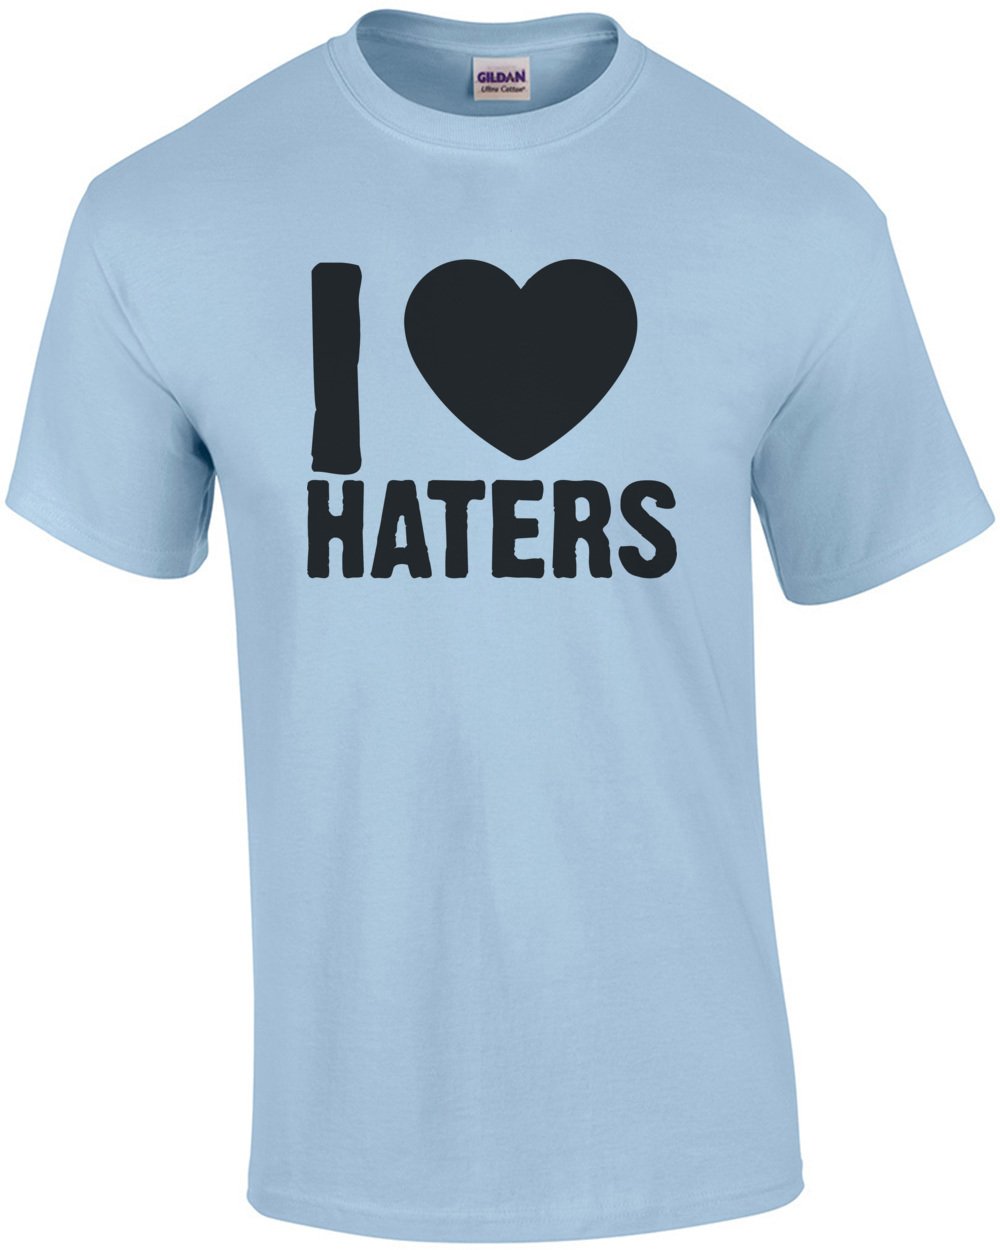 I <3 Haters